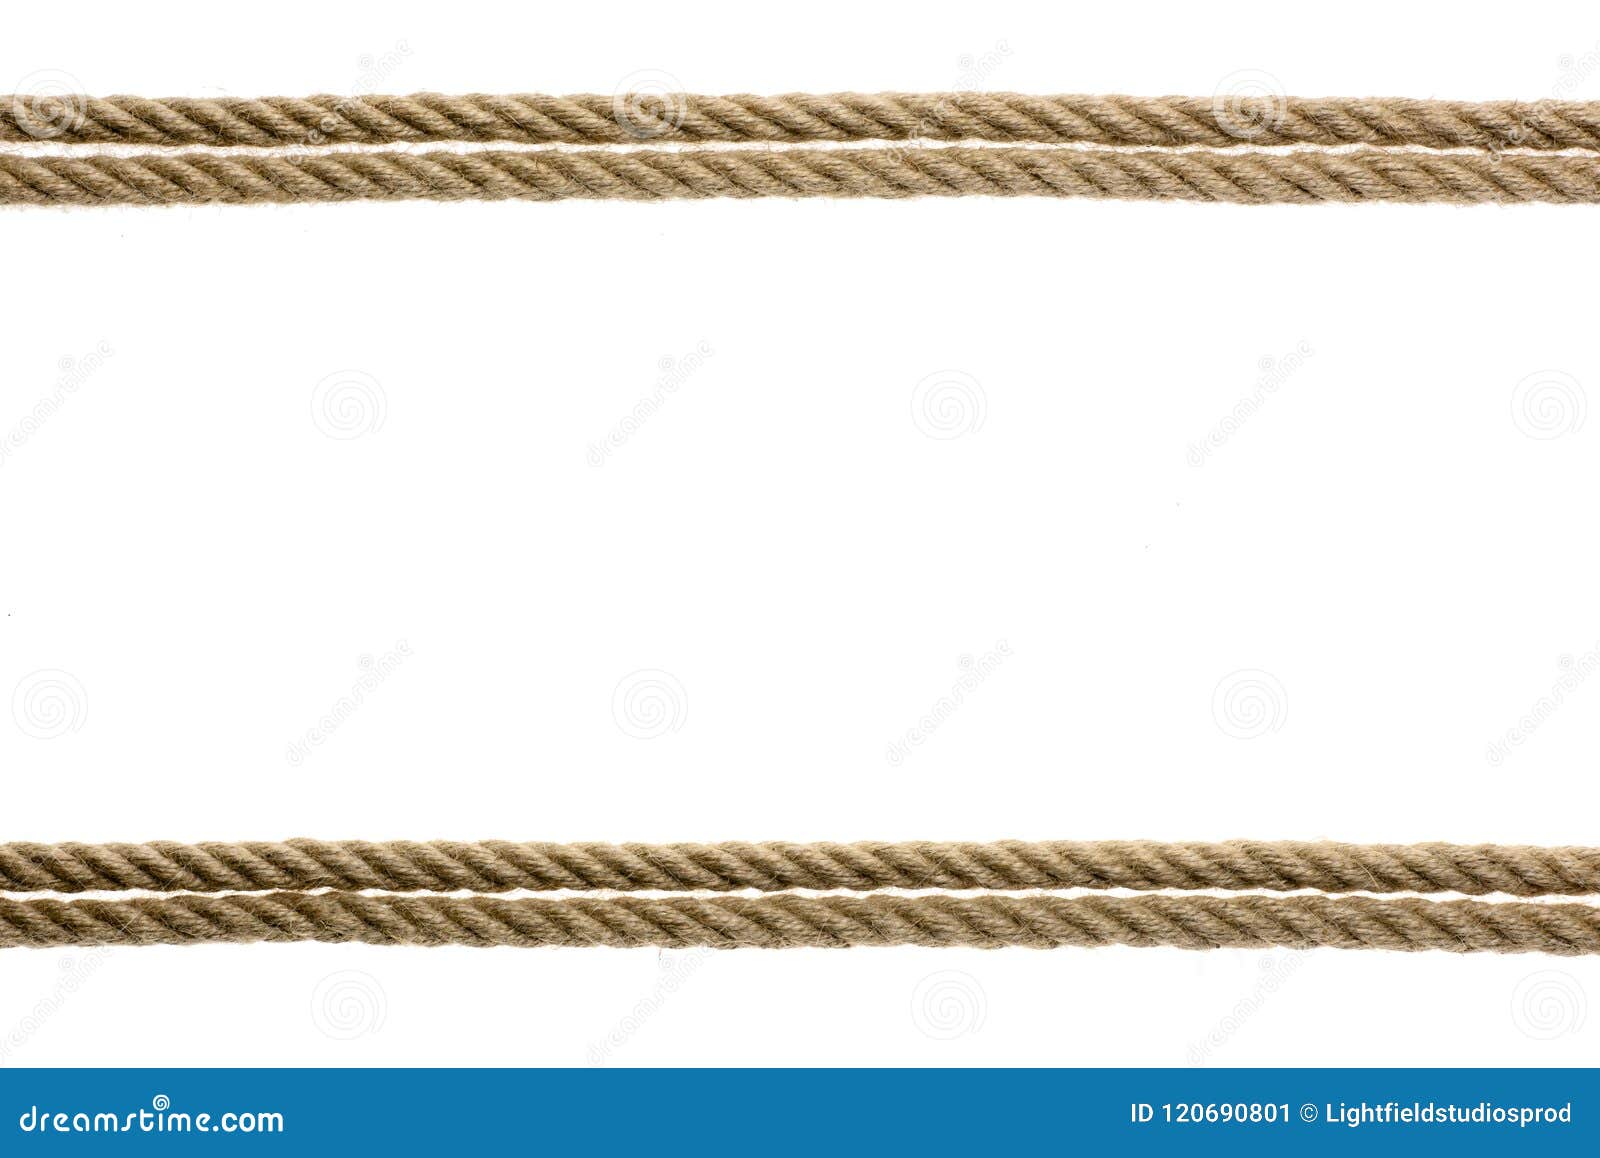 11,626 Straight Rope Images, Stock Photos, 3D objects, & Vectors